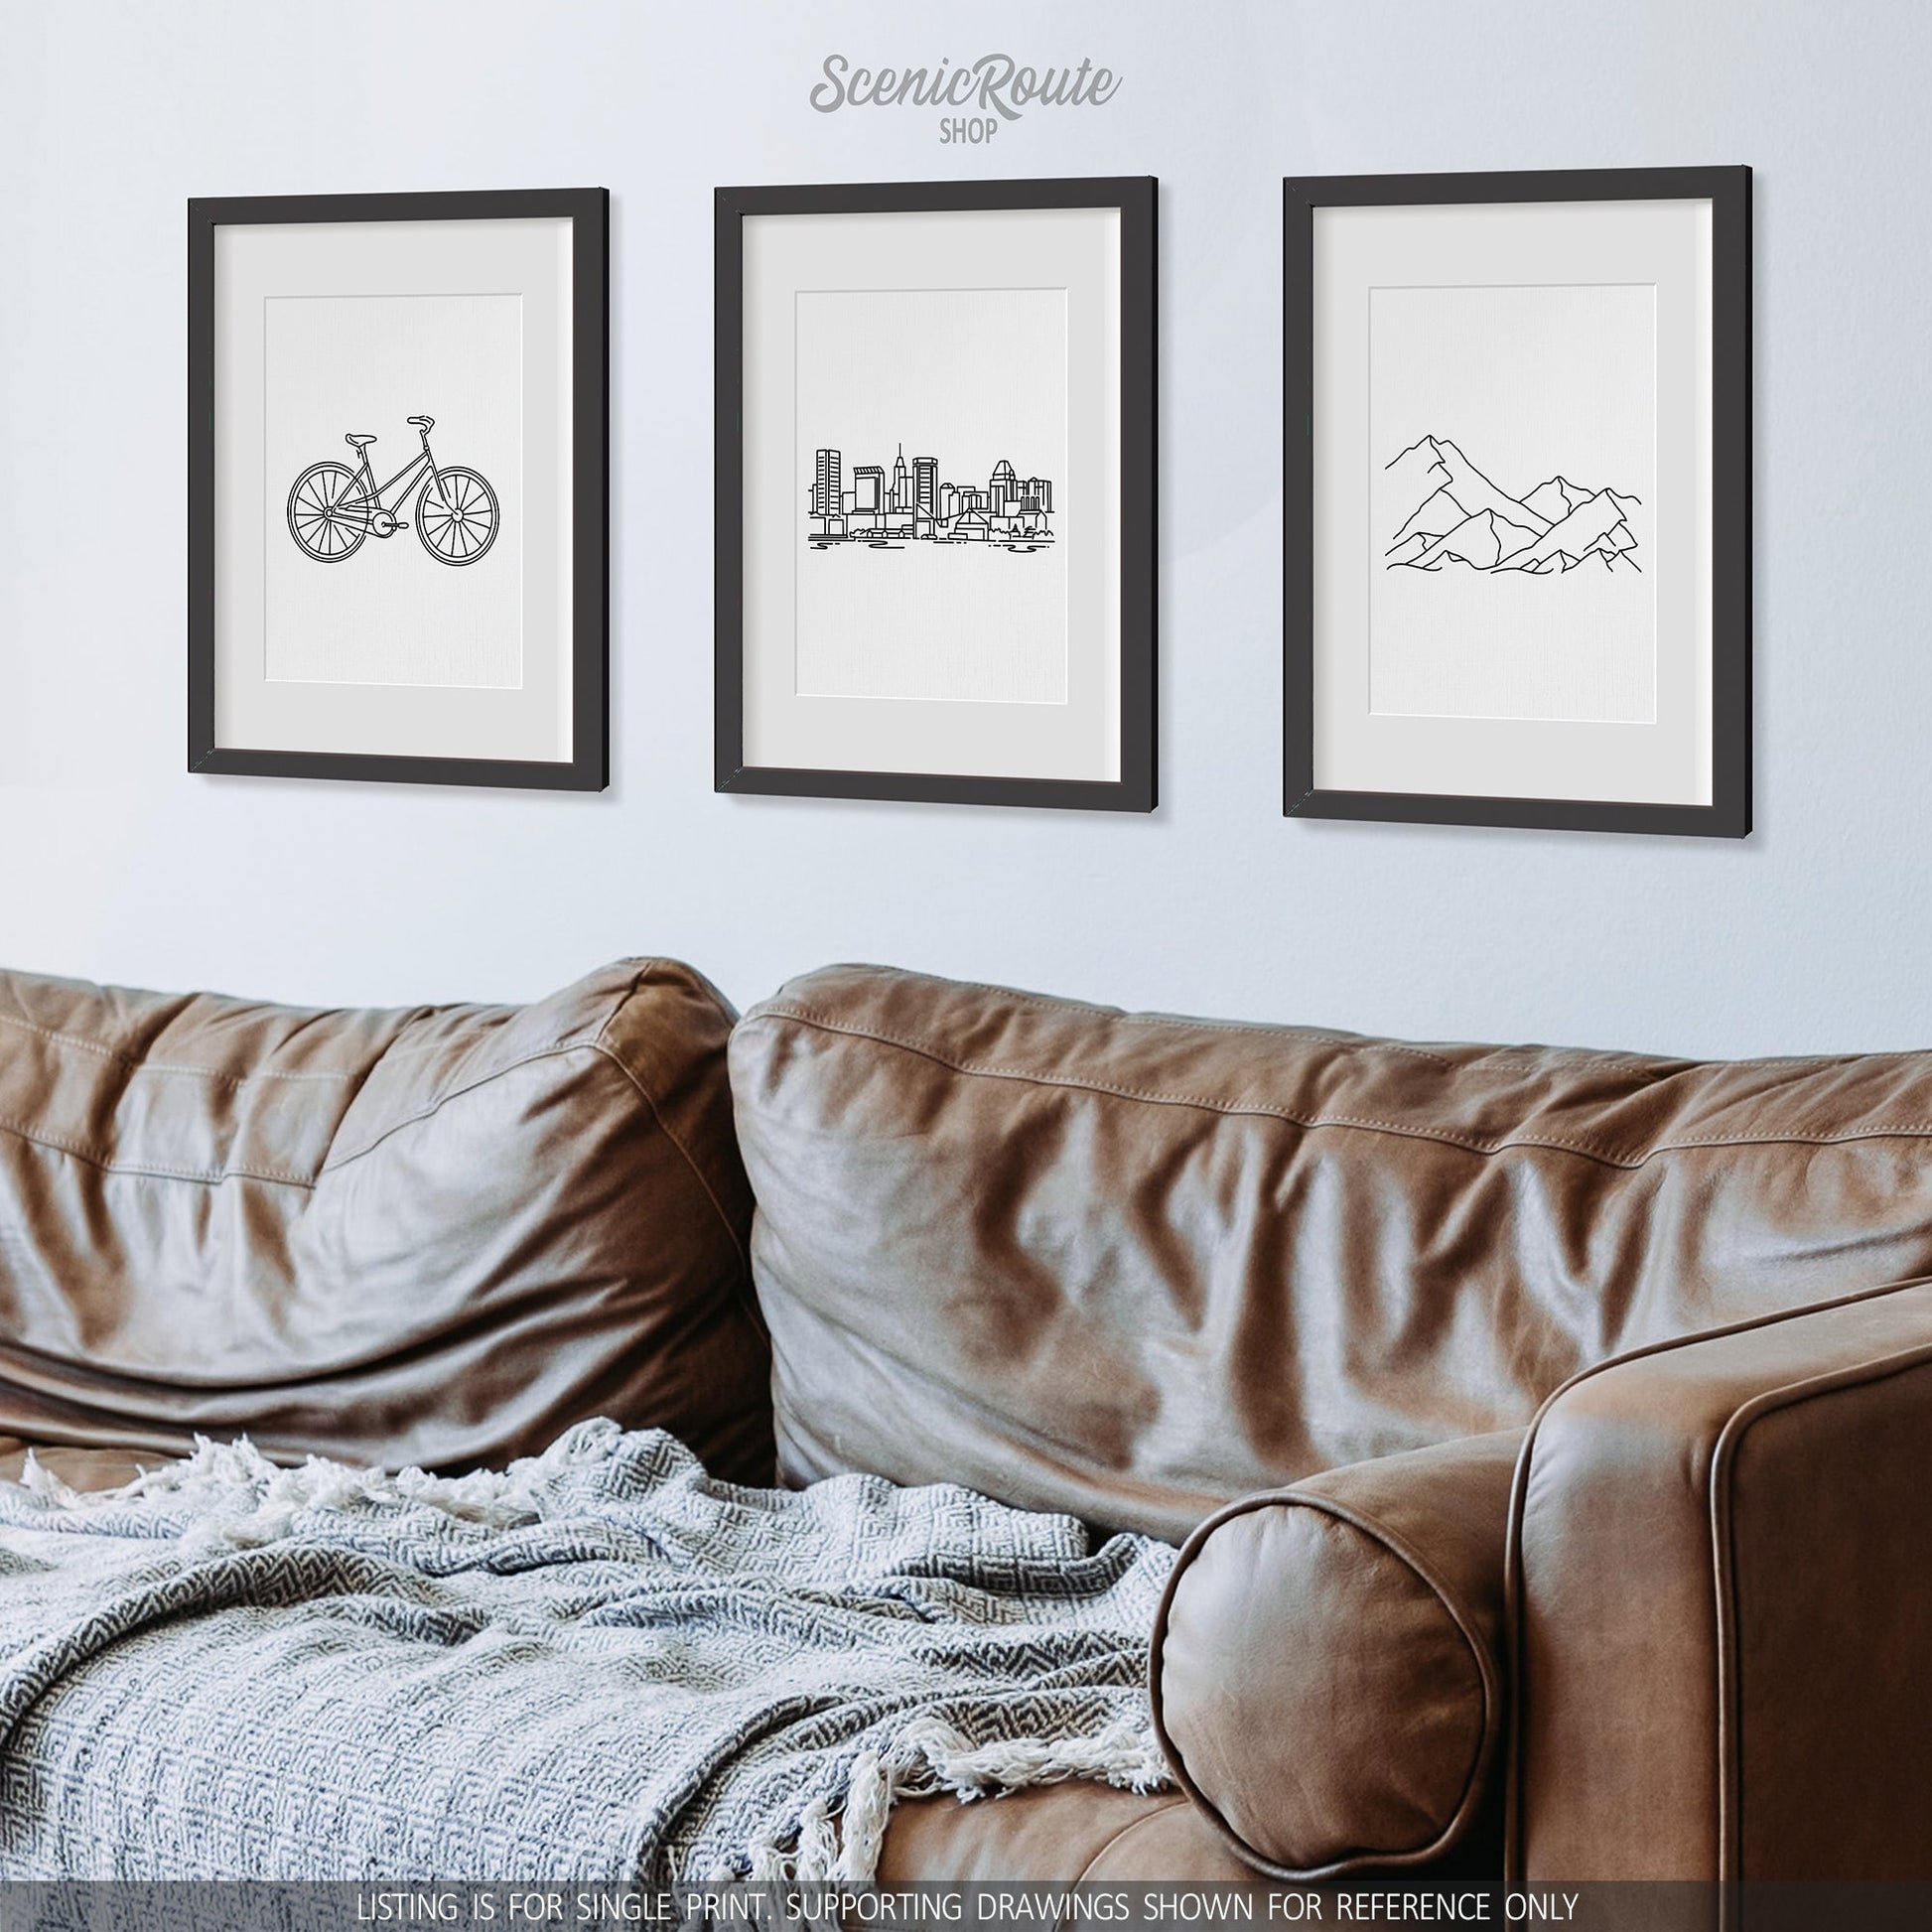 A group of three framed drawings on a wall above a leather couch. The line art drawings include a Bicycle, Baltimore Skyline, and a Mountain Range